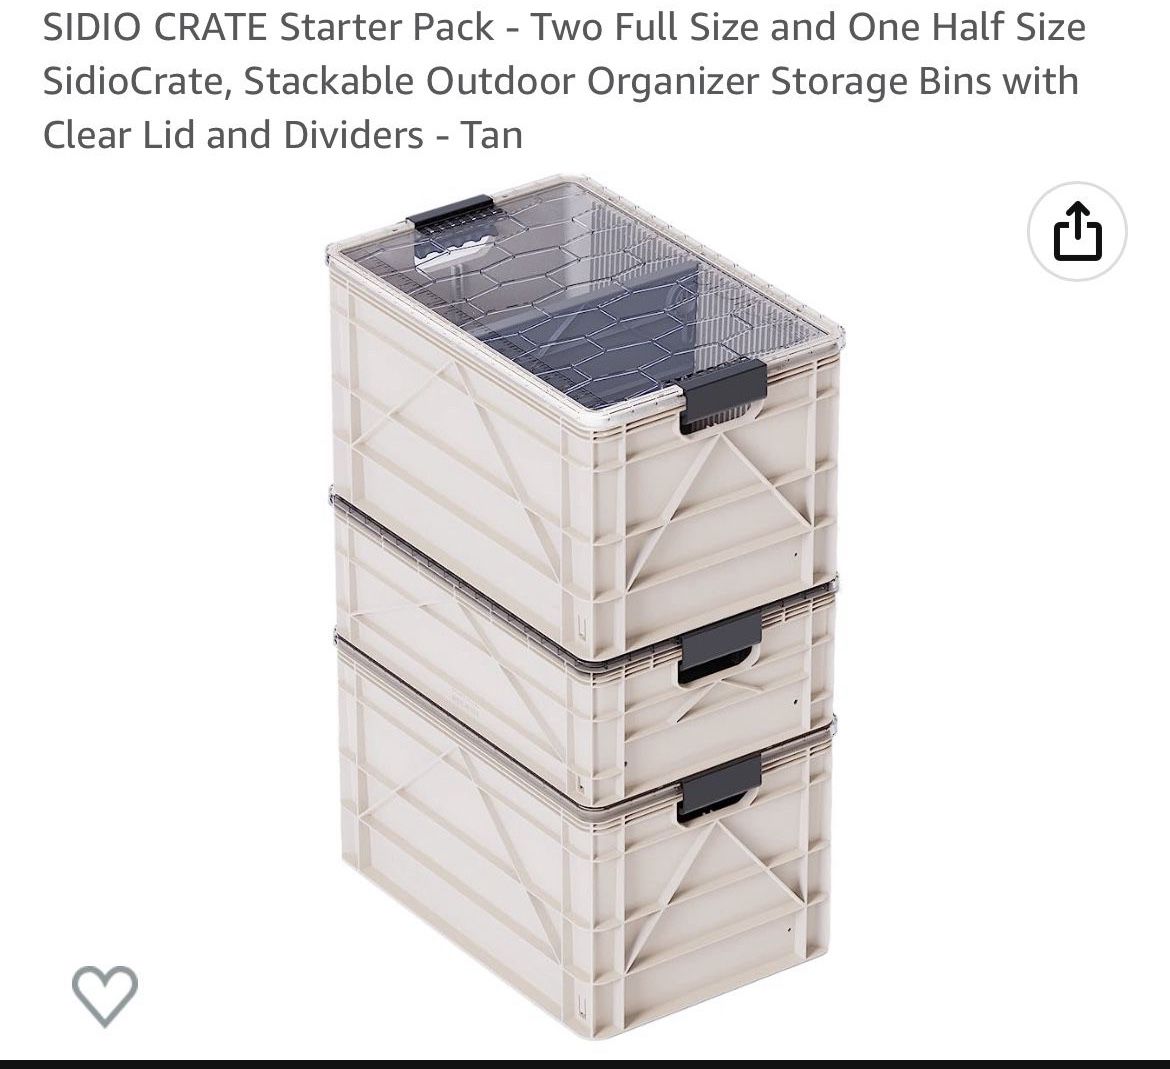 3 Stackable Outdoor Organizer Storage Bins with Clear Lid and